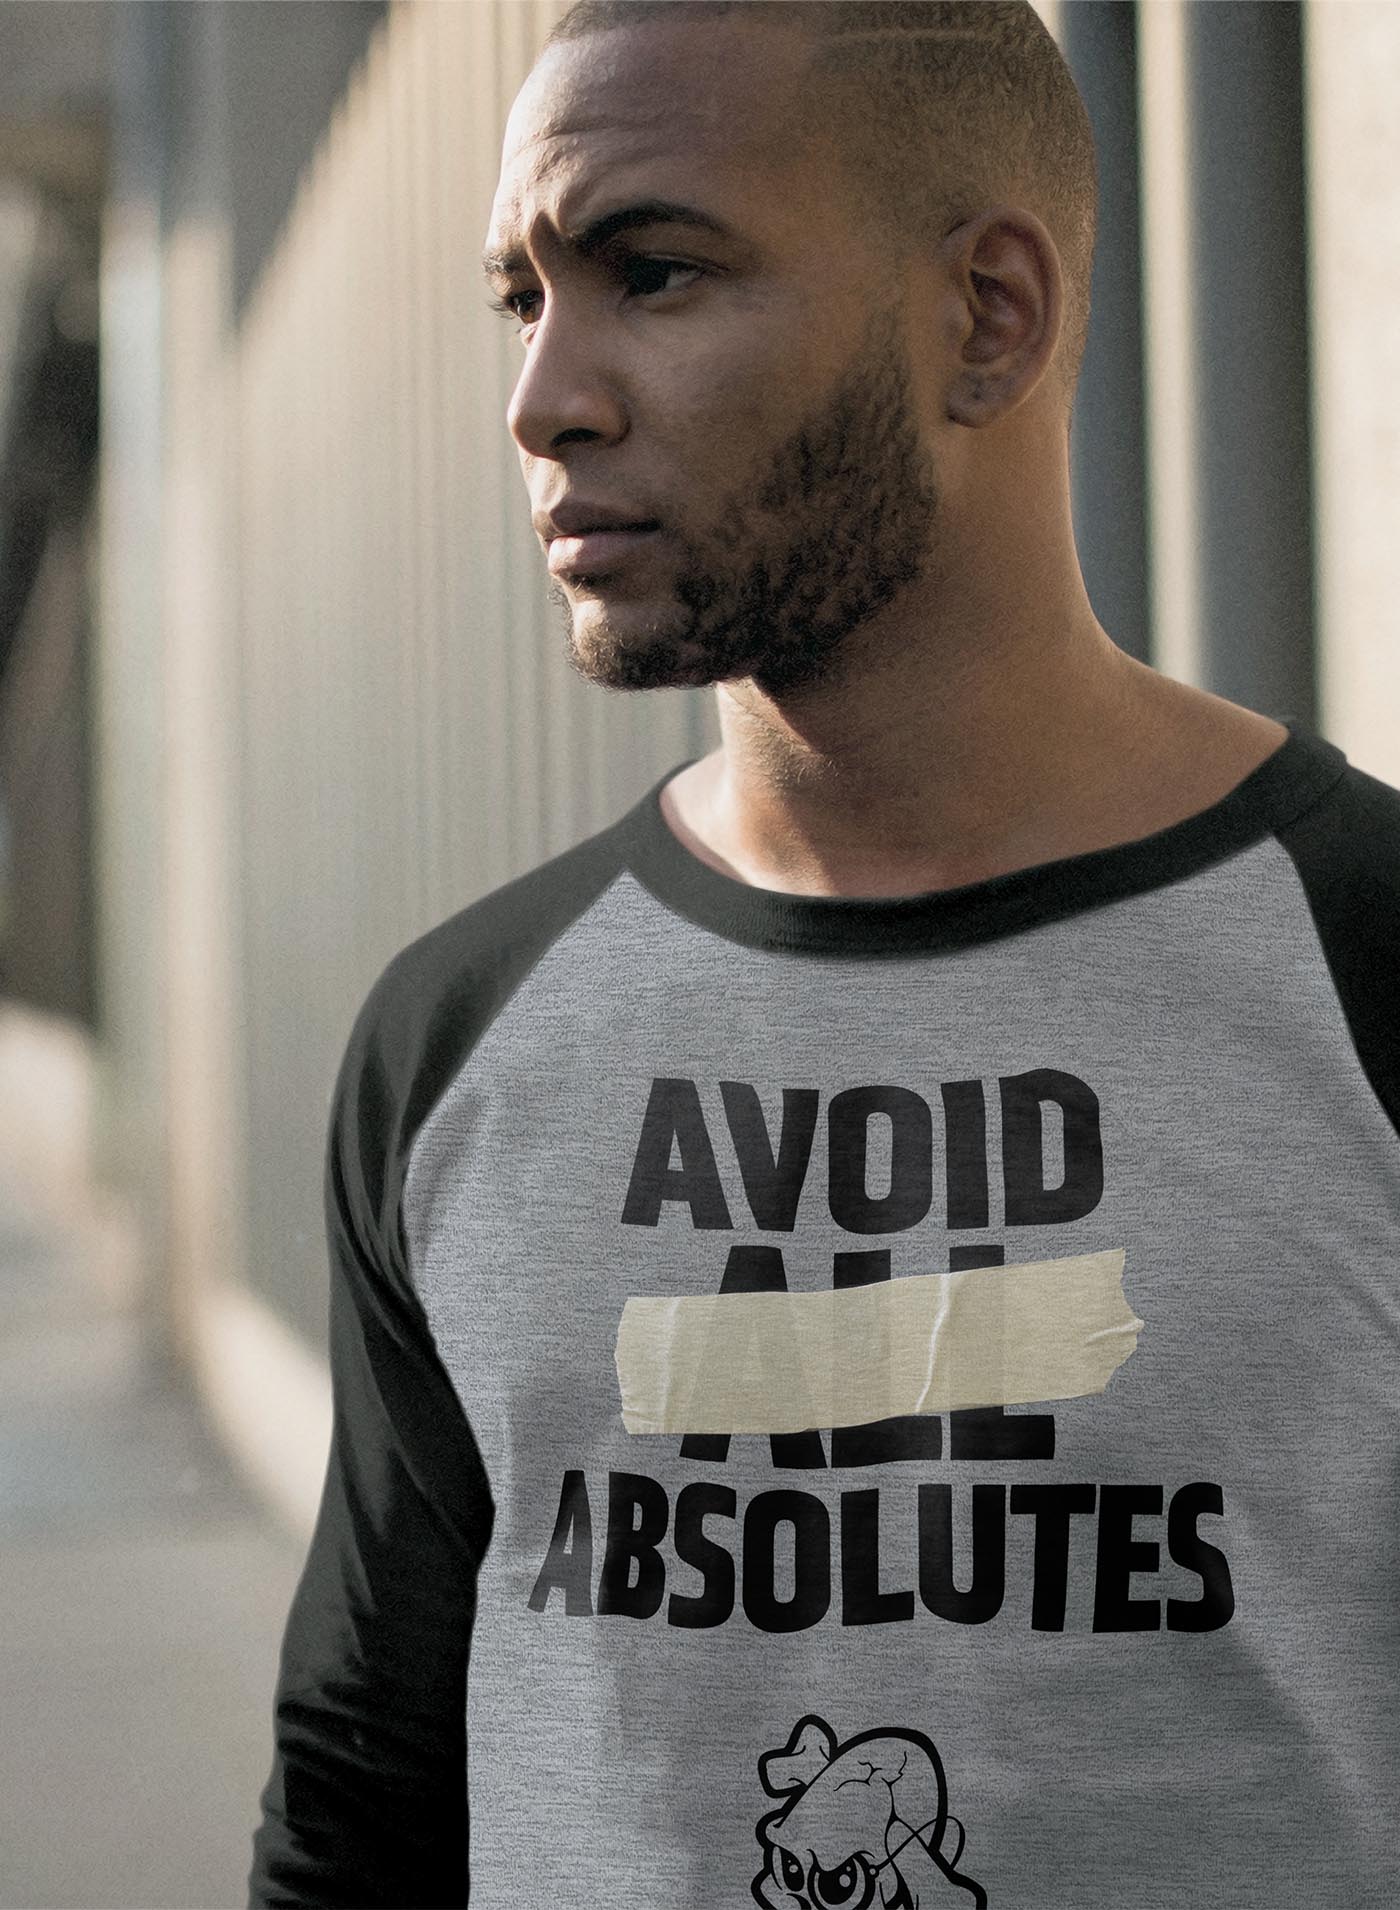 man modeling a Heather grey unisex reglan t-shirt featuring the paradoxical phrase "avoid all absolutes" and the moghoul logo.